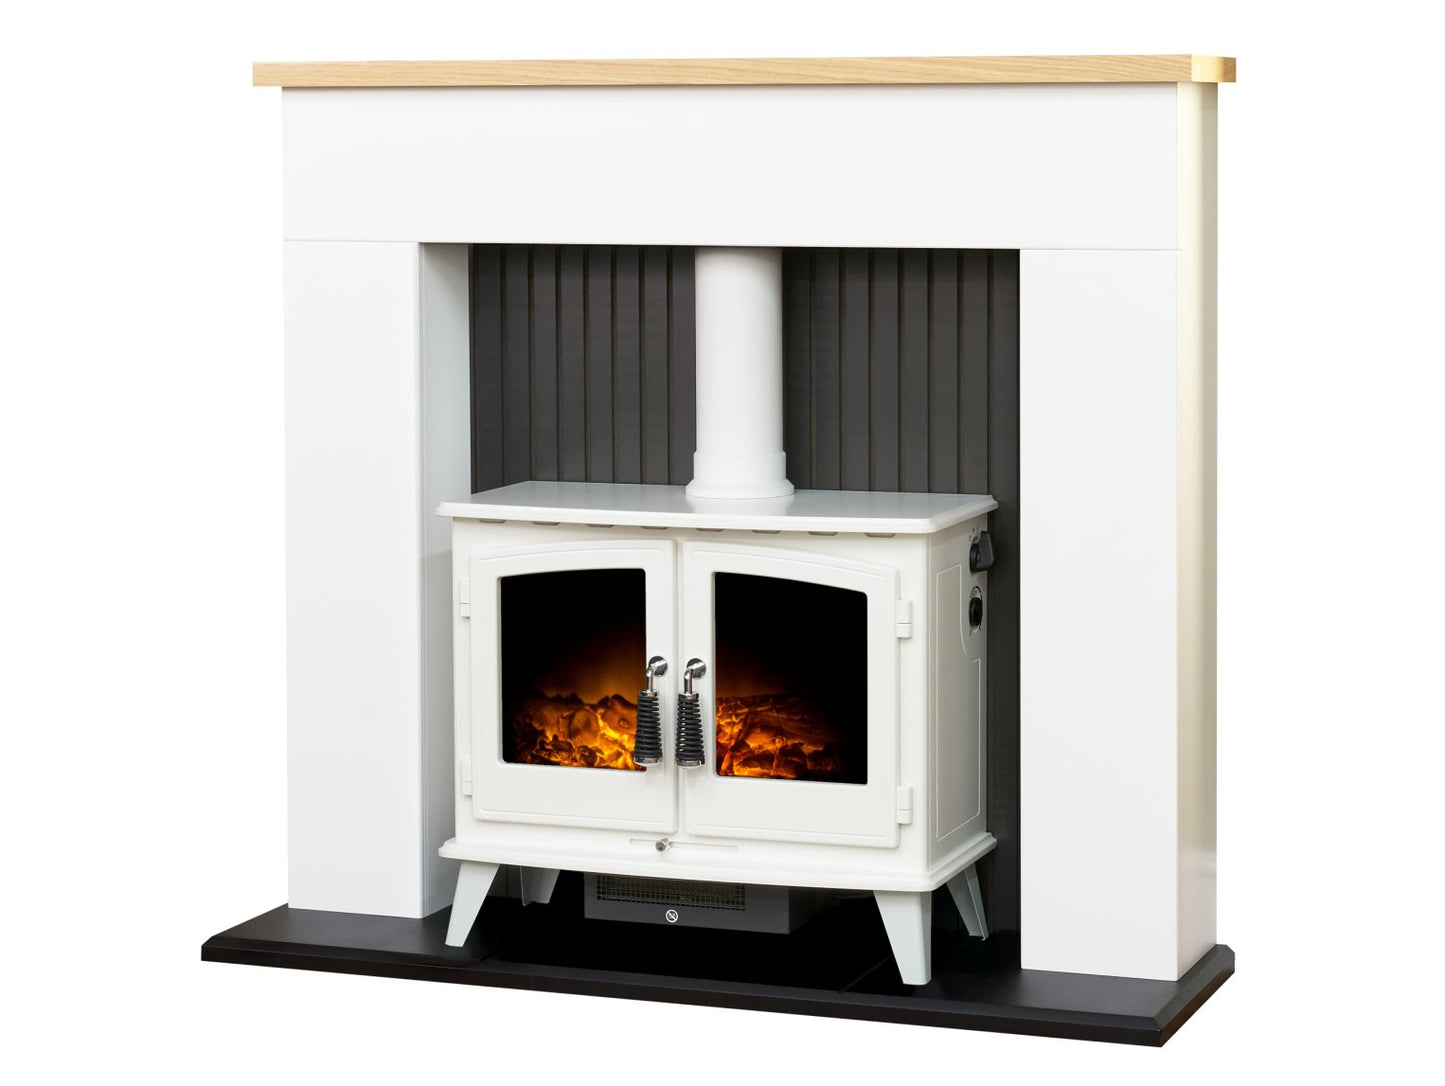 Adam Innsbruck Stove Fireplace Pure White + Woodhouse Electric Stove White, 48"